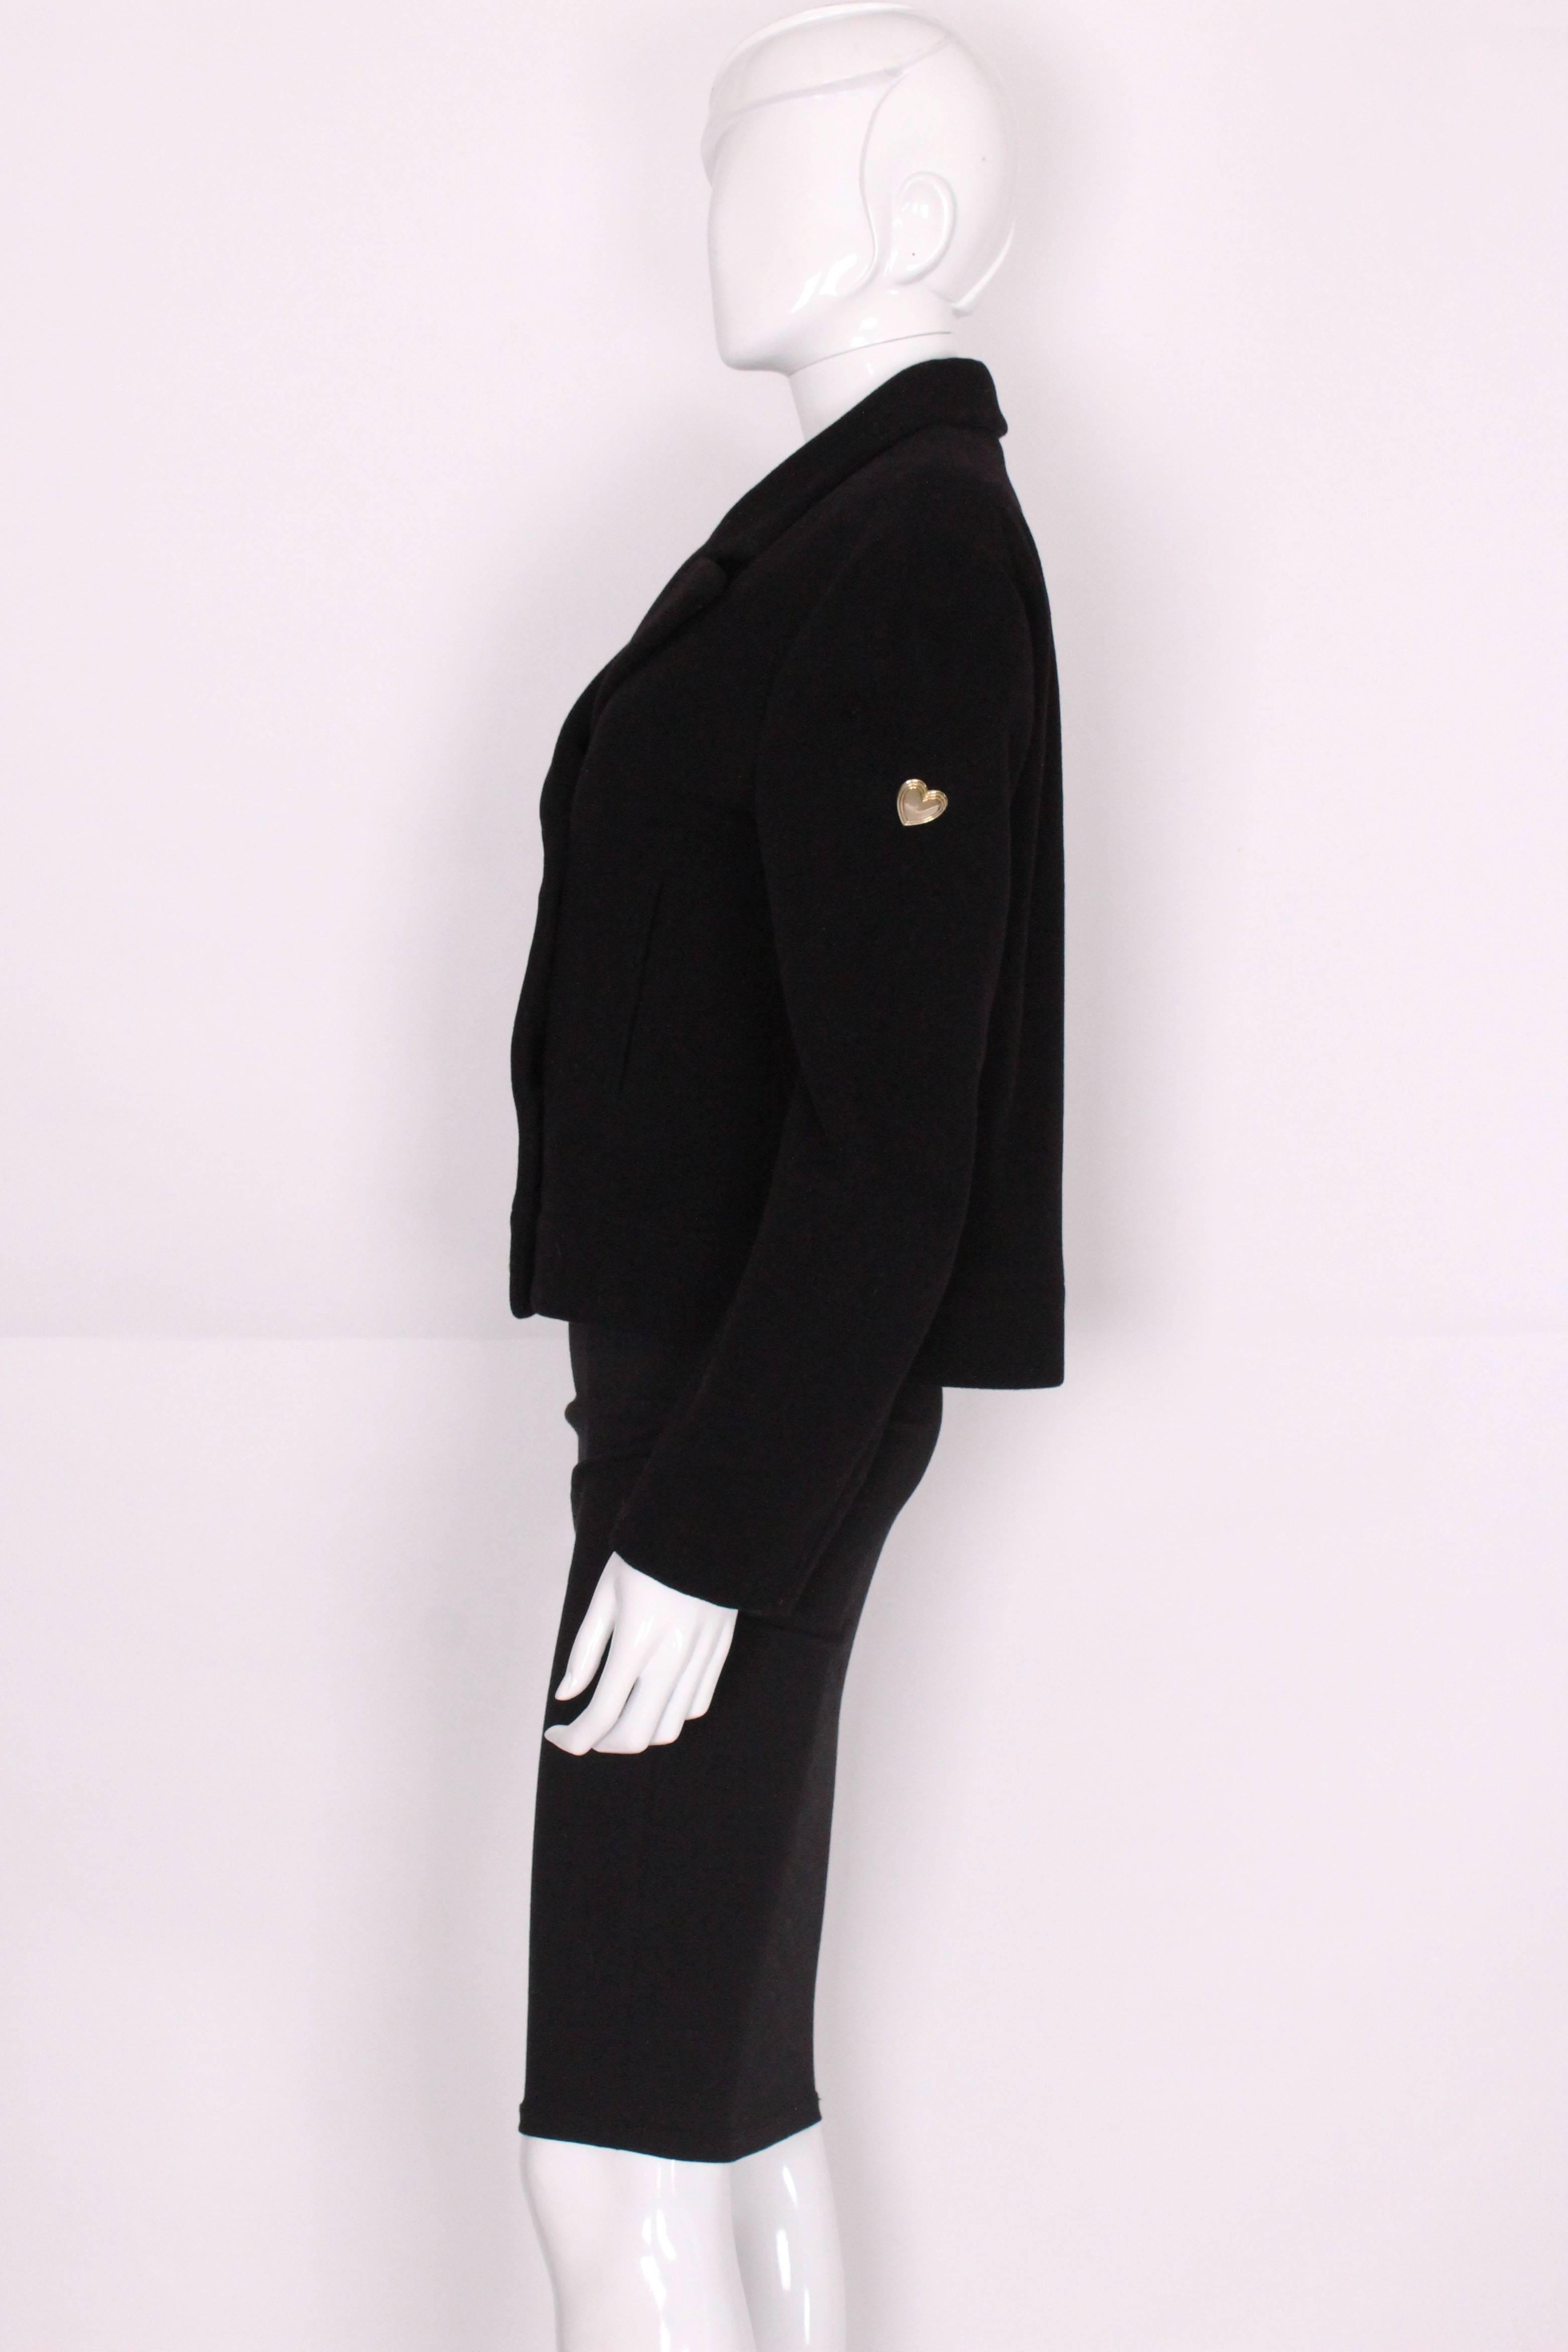 Black Wool and Mohair Jacket by Moschino Cheap and Chic.